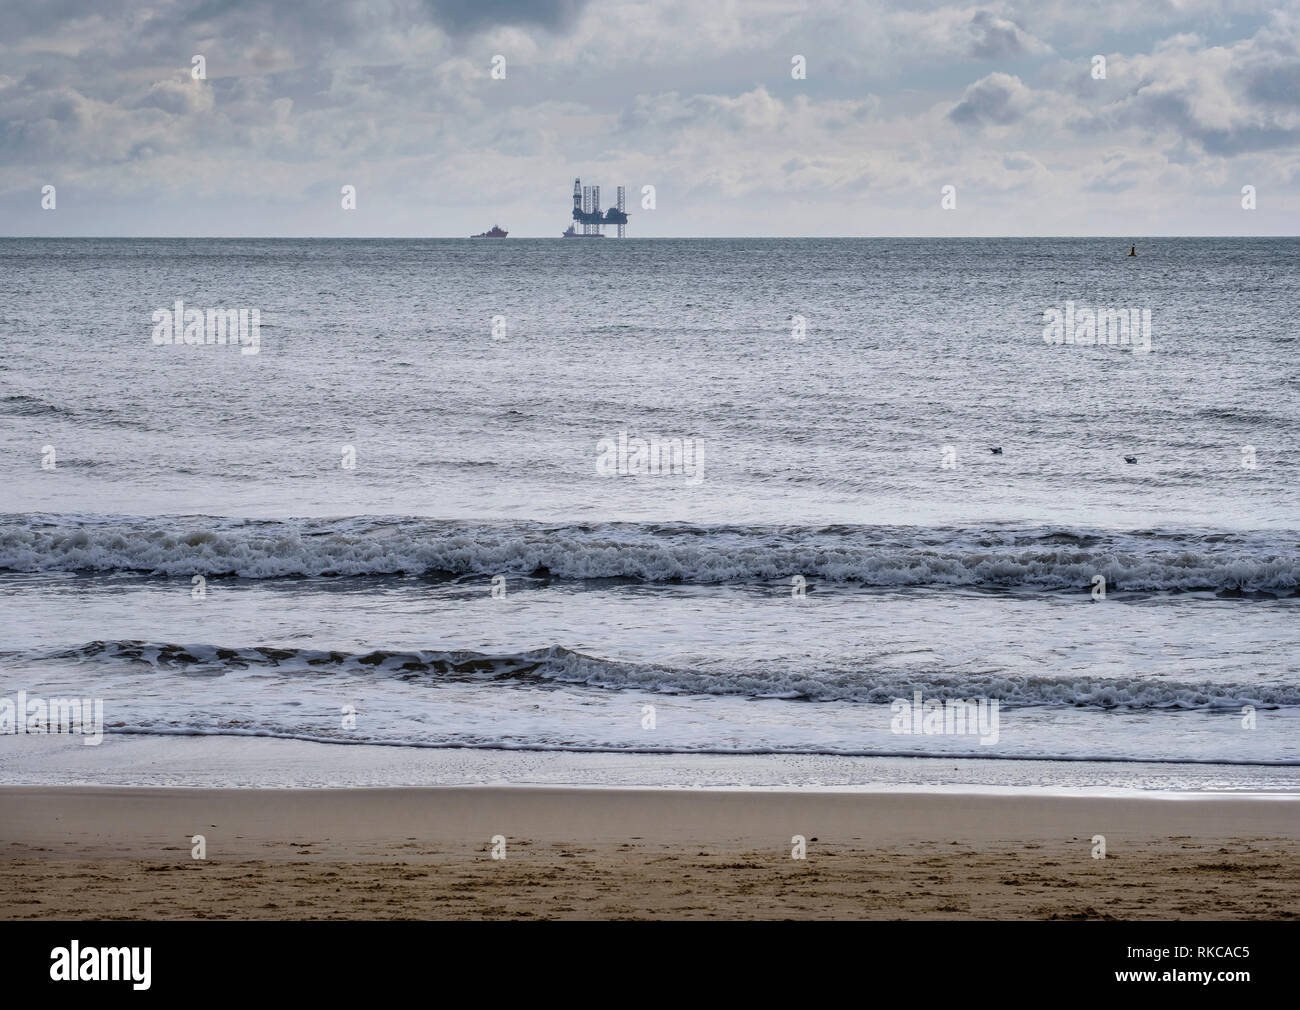 Oil rig in Poole Bay, from Bournemouth beach, drilling below the seabed to explore oil reserves. . The rig is 3.7 miles south of Studland and is visible from Bournemouth, Isle of Purbeck, Dorset and the Isle of Wight. England, UK. Stock Photo